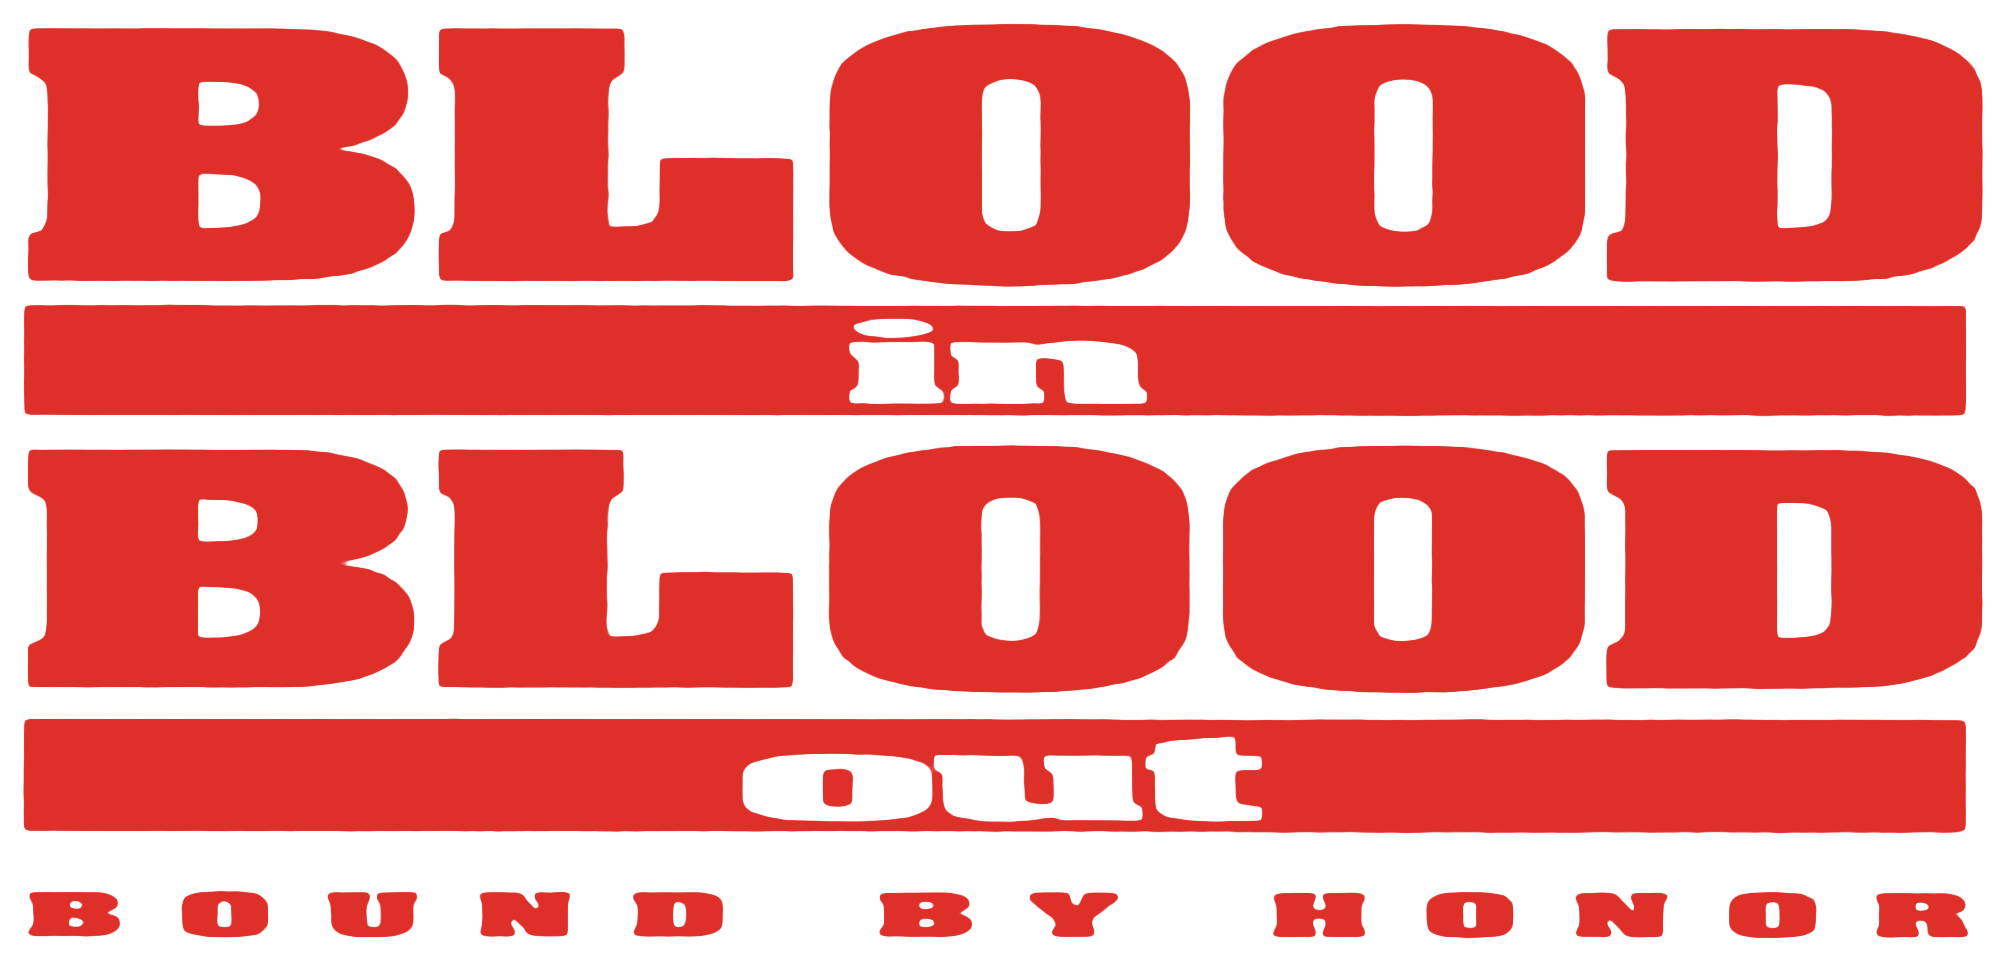 Blood in Slood Out Movie PNG HD Calidad